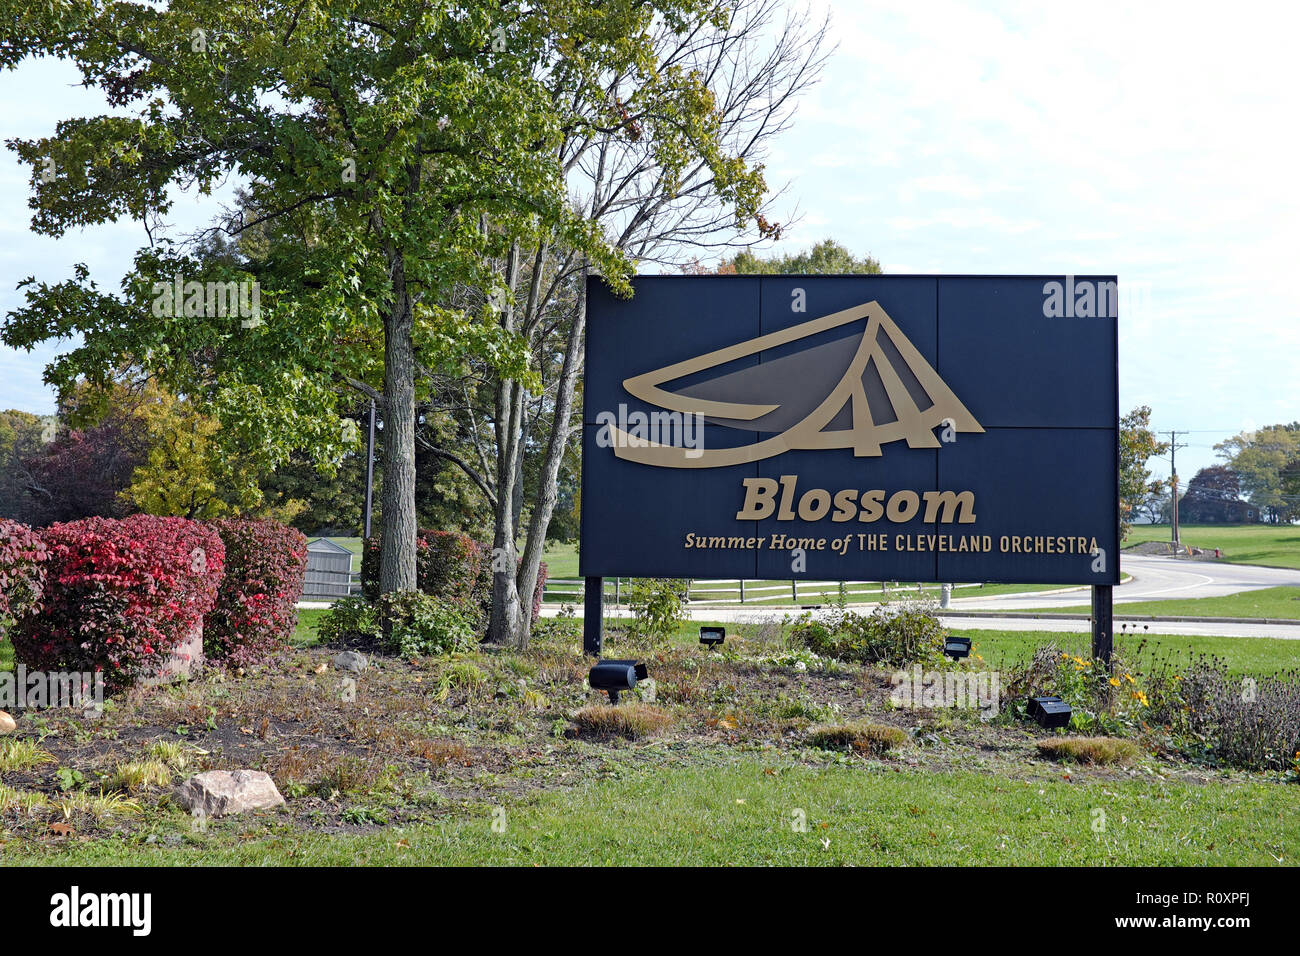 Blossom Music Center, a summer concert outdoor amphitheare music venue,is located in Cuyahoga Falls, Ohio, USA in the Cuyahoga Valley National Park. Stock Photo